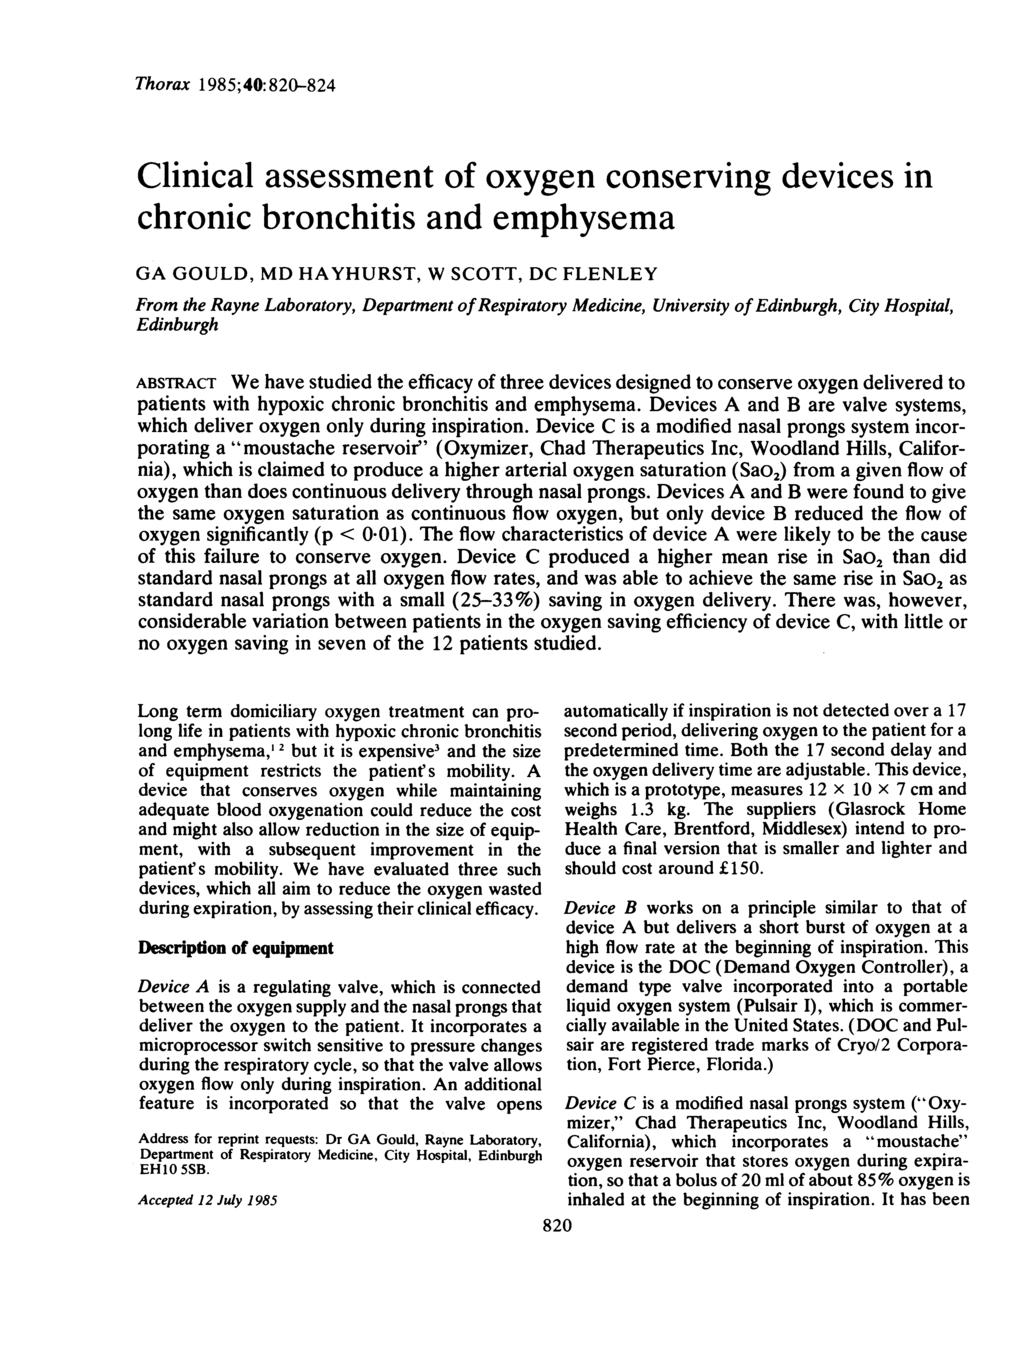 Thorax 1985;40:820-824 Clinical assessment of oxygen conserving devices in chronic bronchitis and emphysema GA GOULD, MD HAYHURST, W SCOTT, DC FLENLEY From the Rayne Laboratory, Department